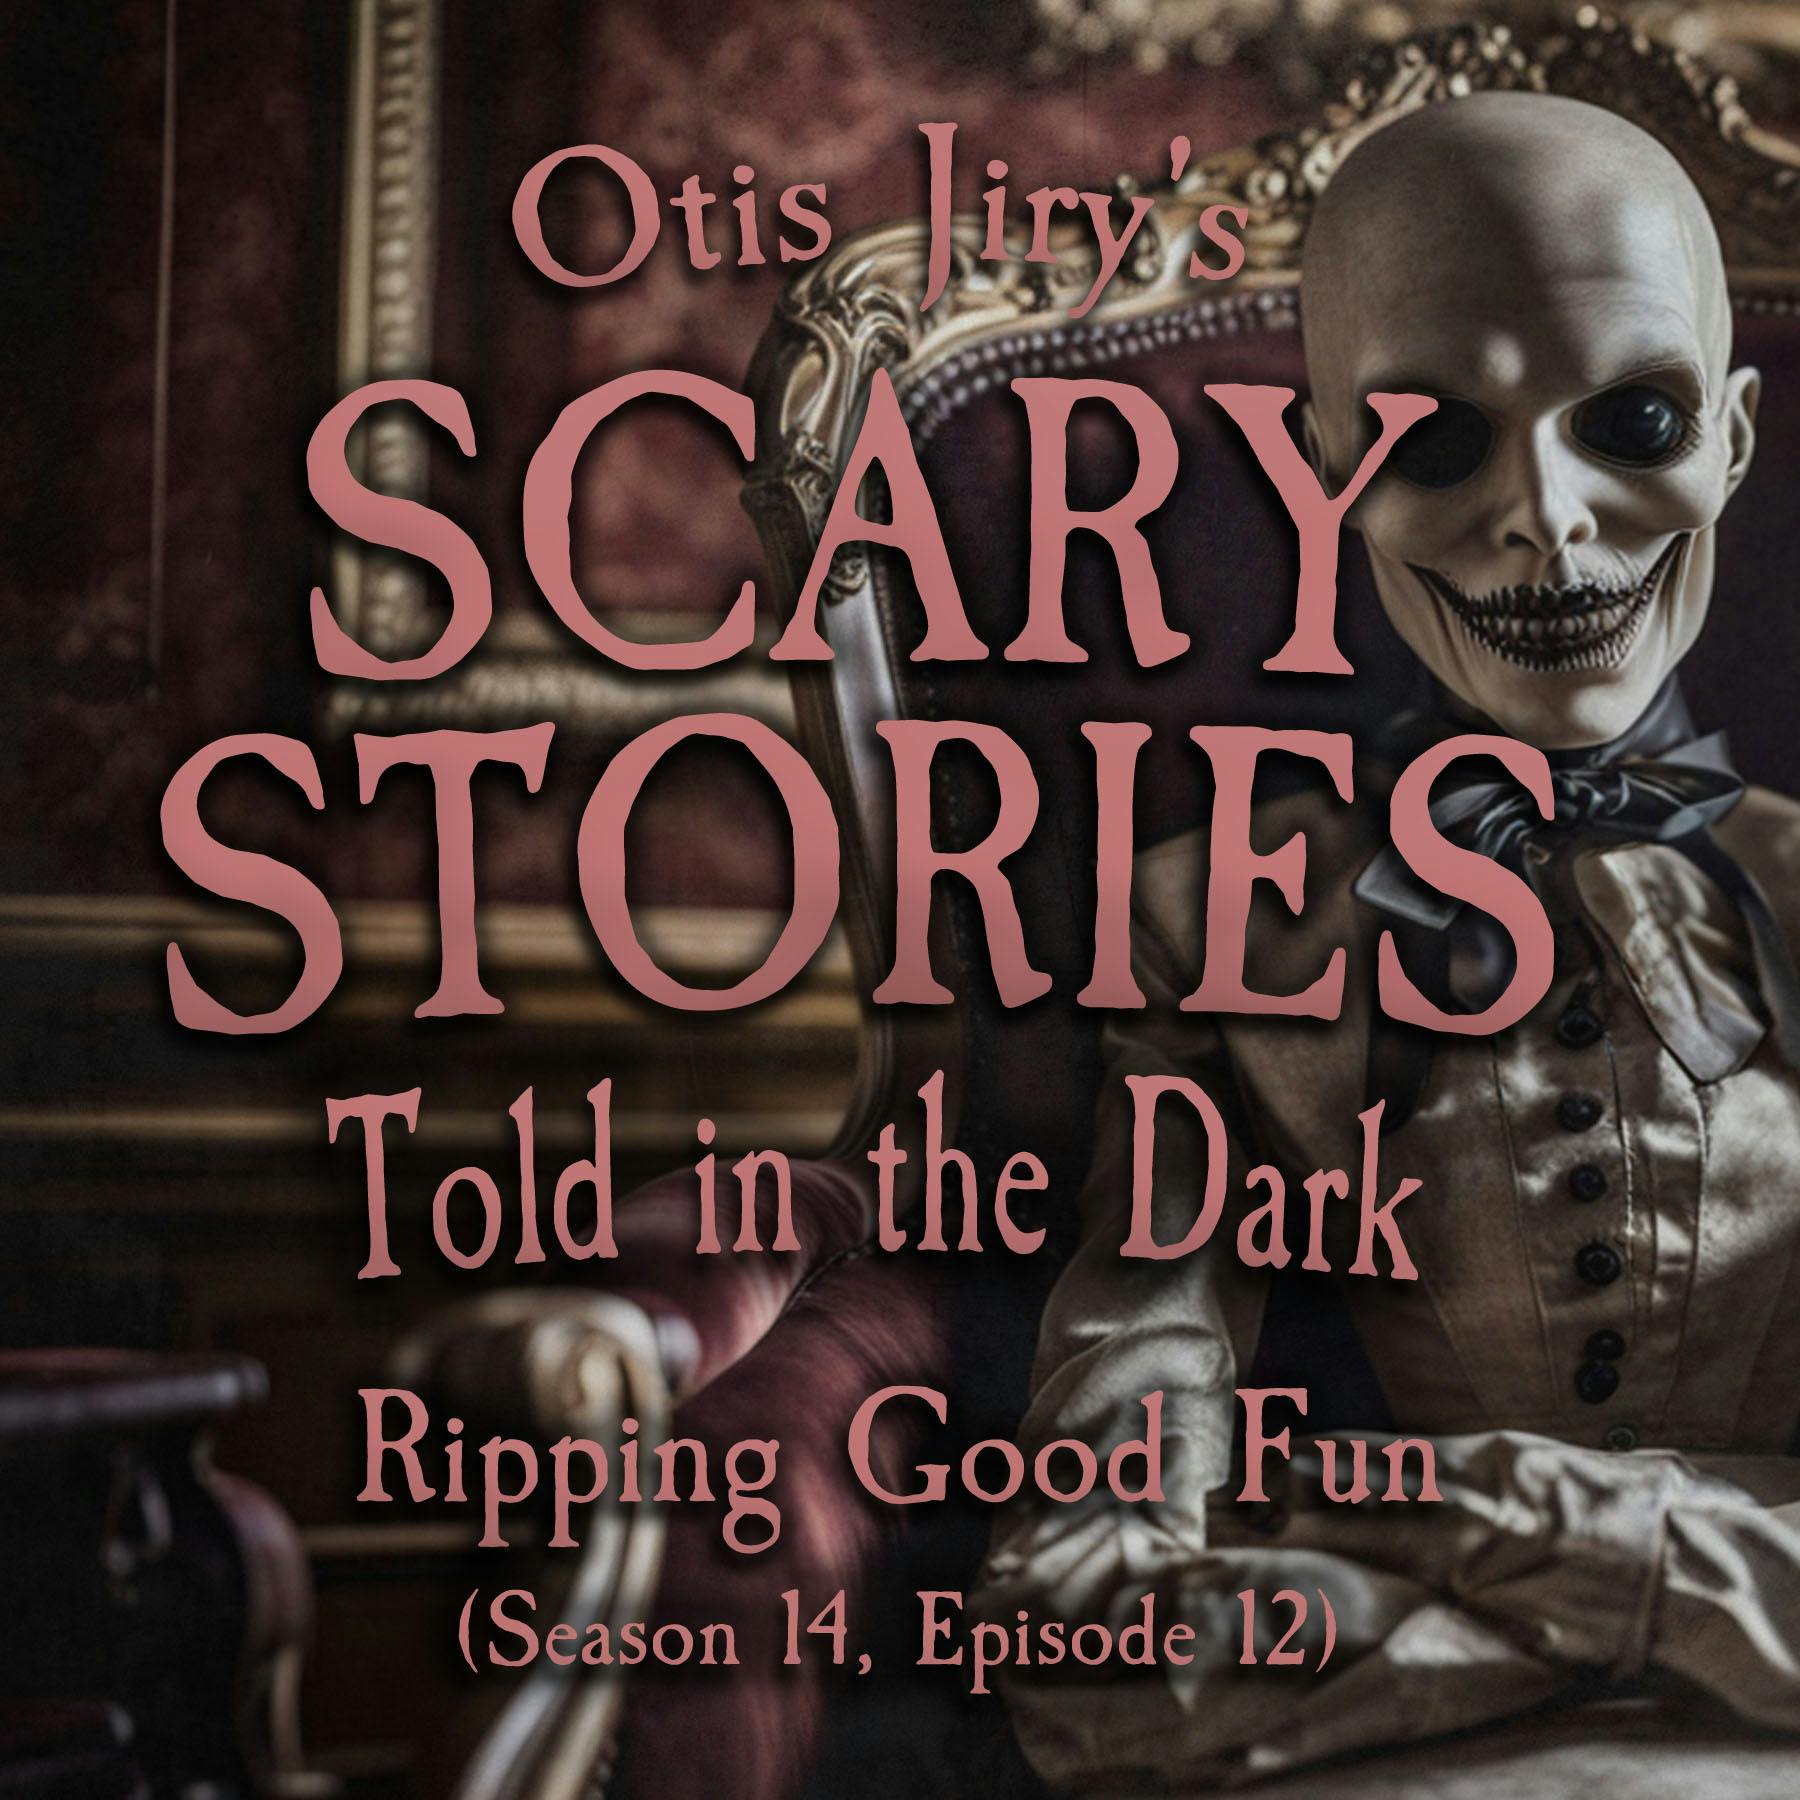 S14E12 - ”Ripping Good Fun” – Scary Stories Told in the Dark